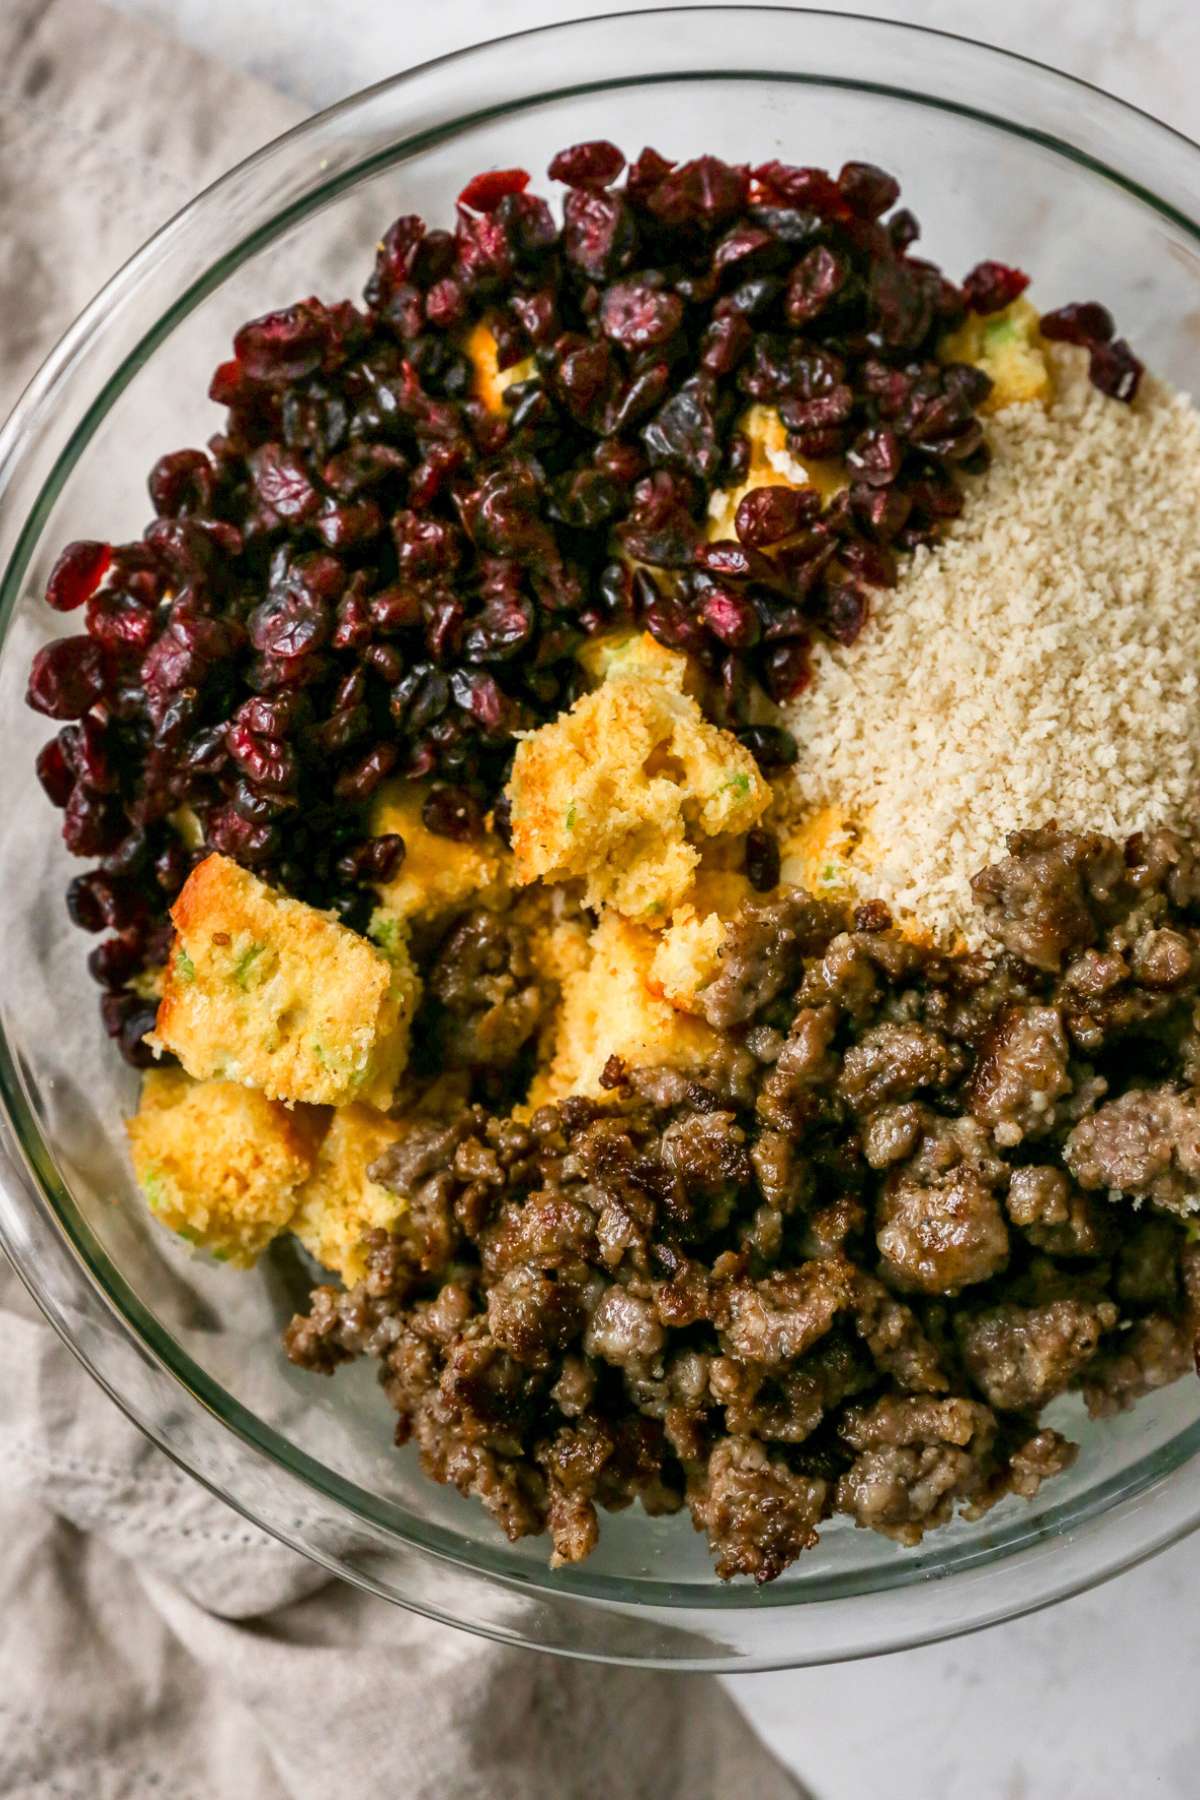 Cornbread, cranberries, sausage and breadcrumbs add to a bowl.